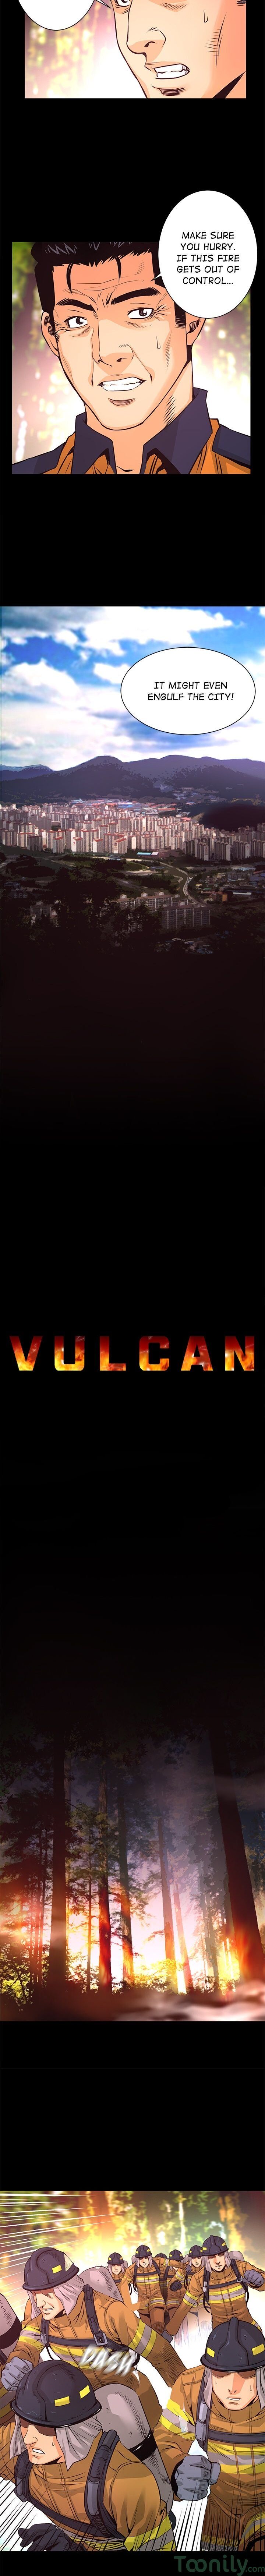 Vulcan - Page 2